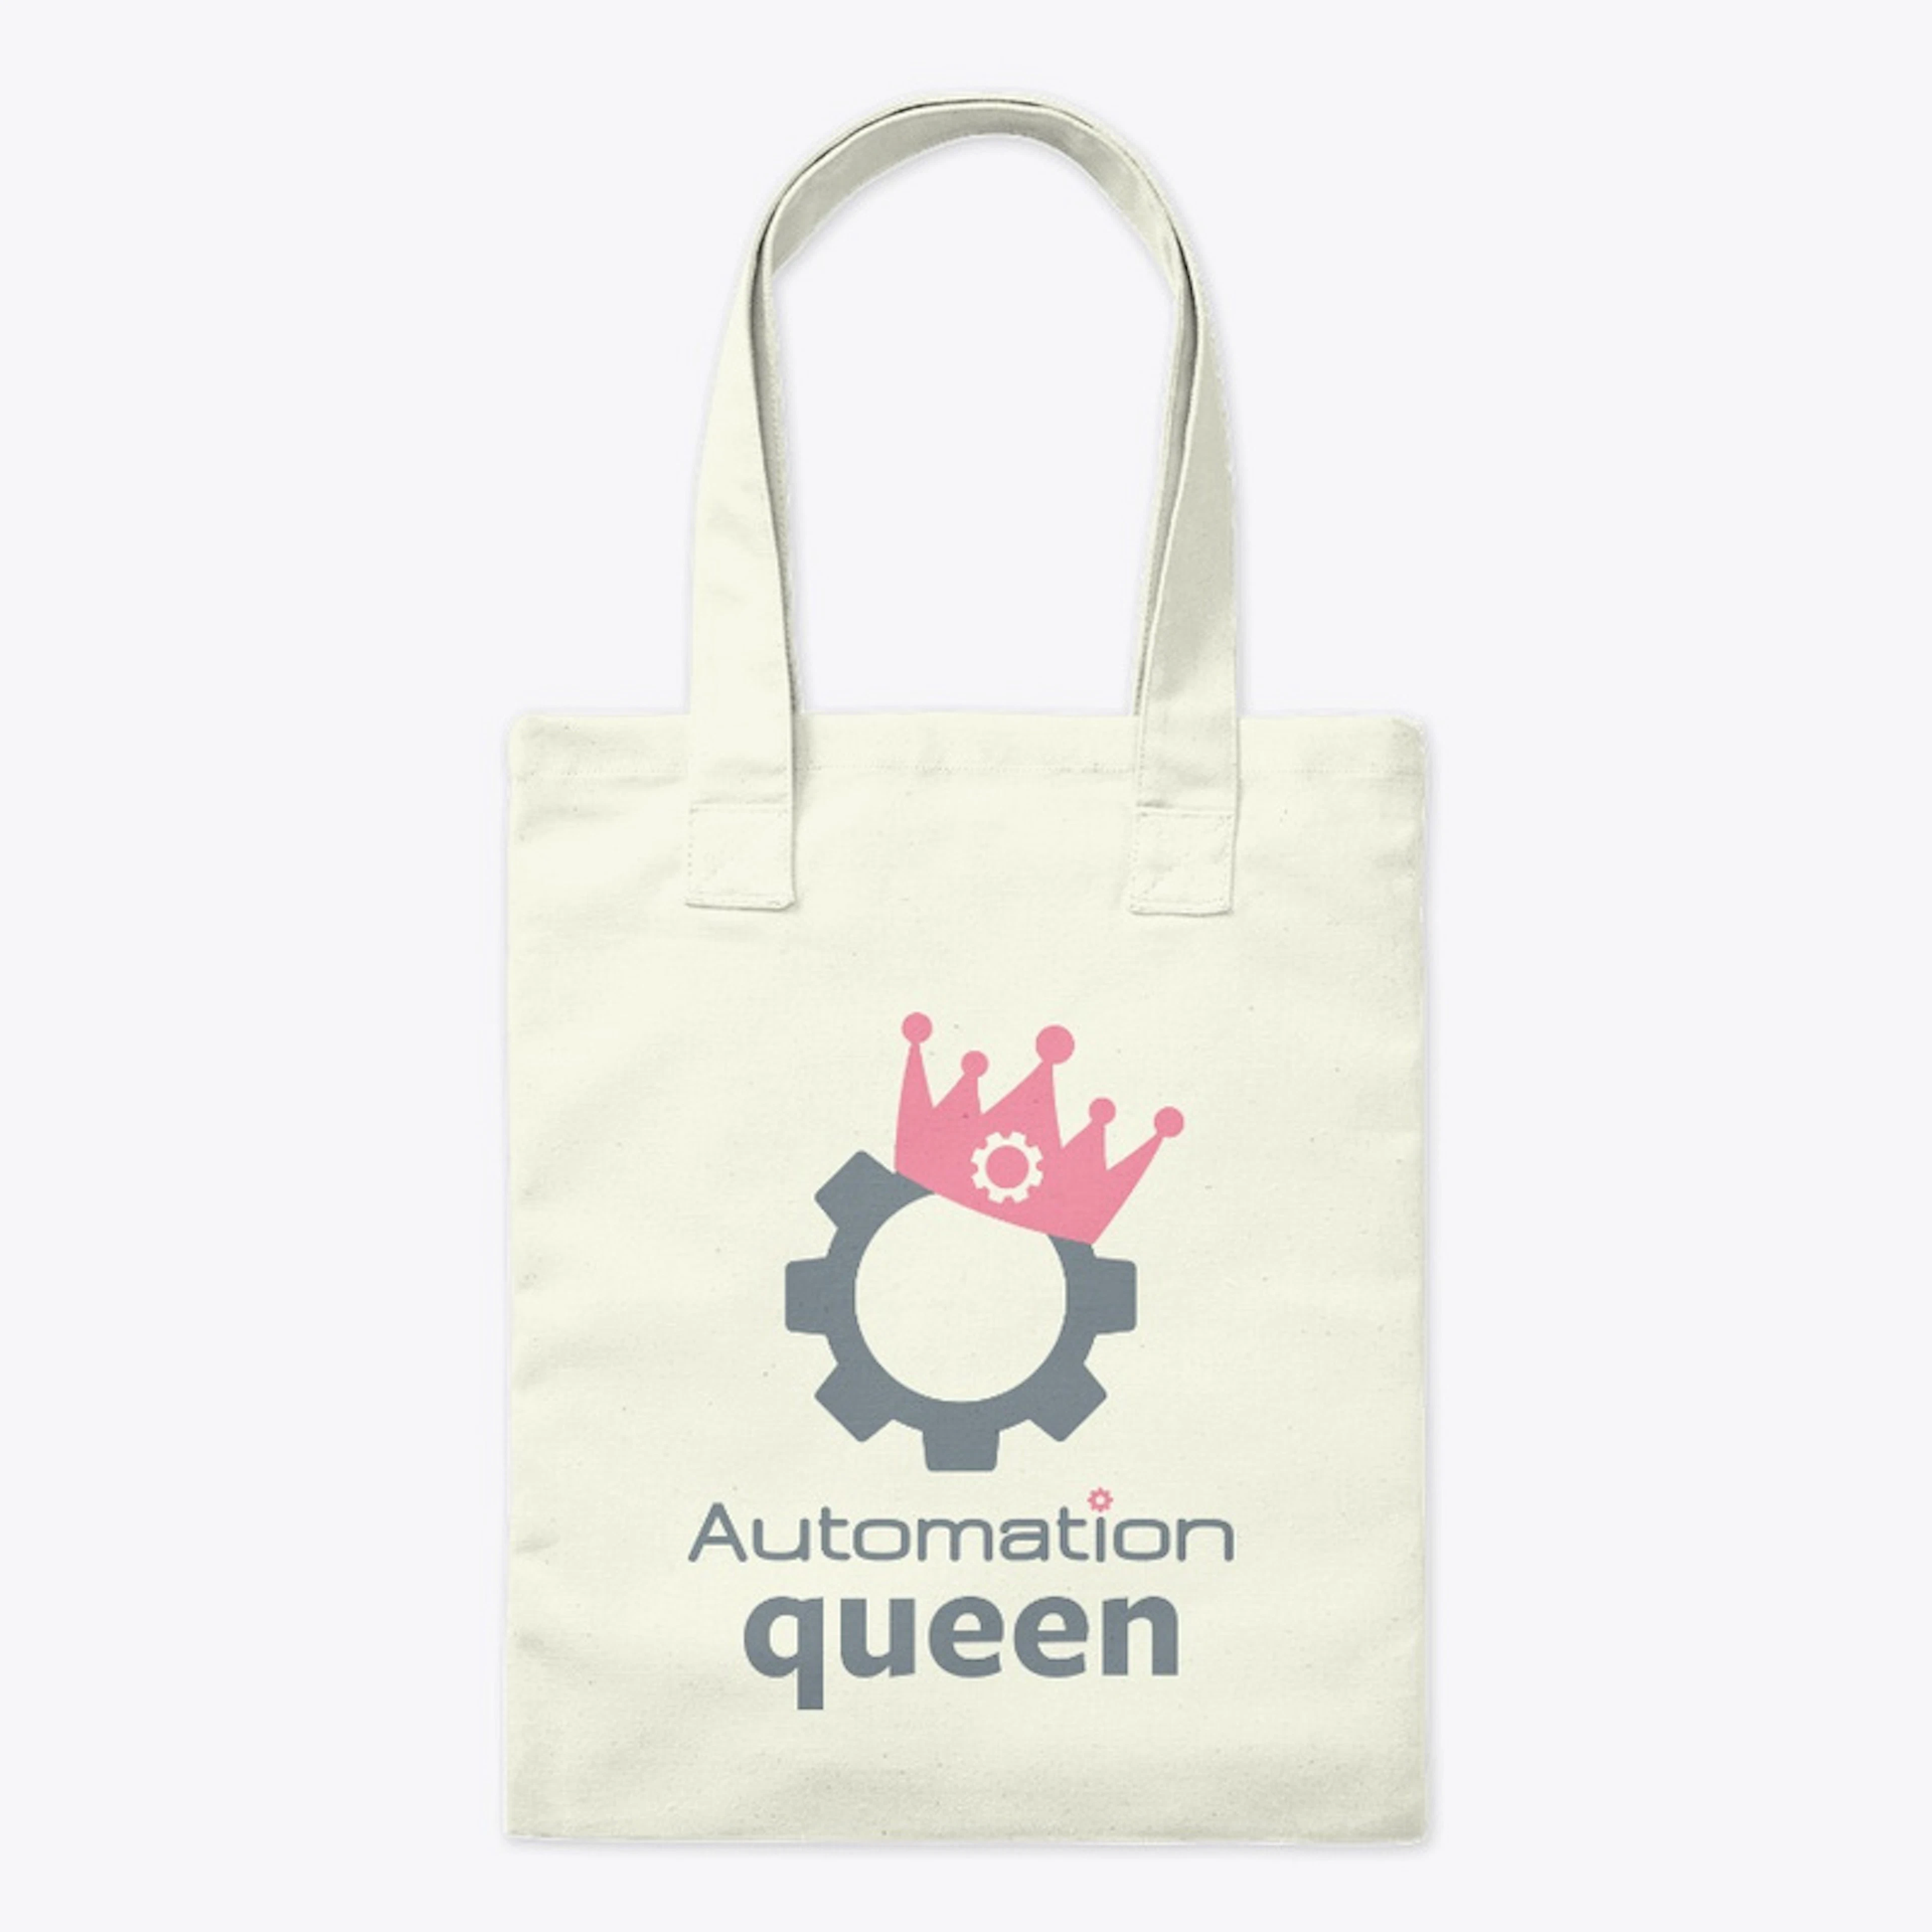 Automation queen